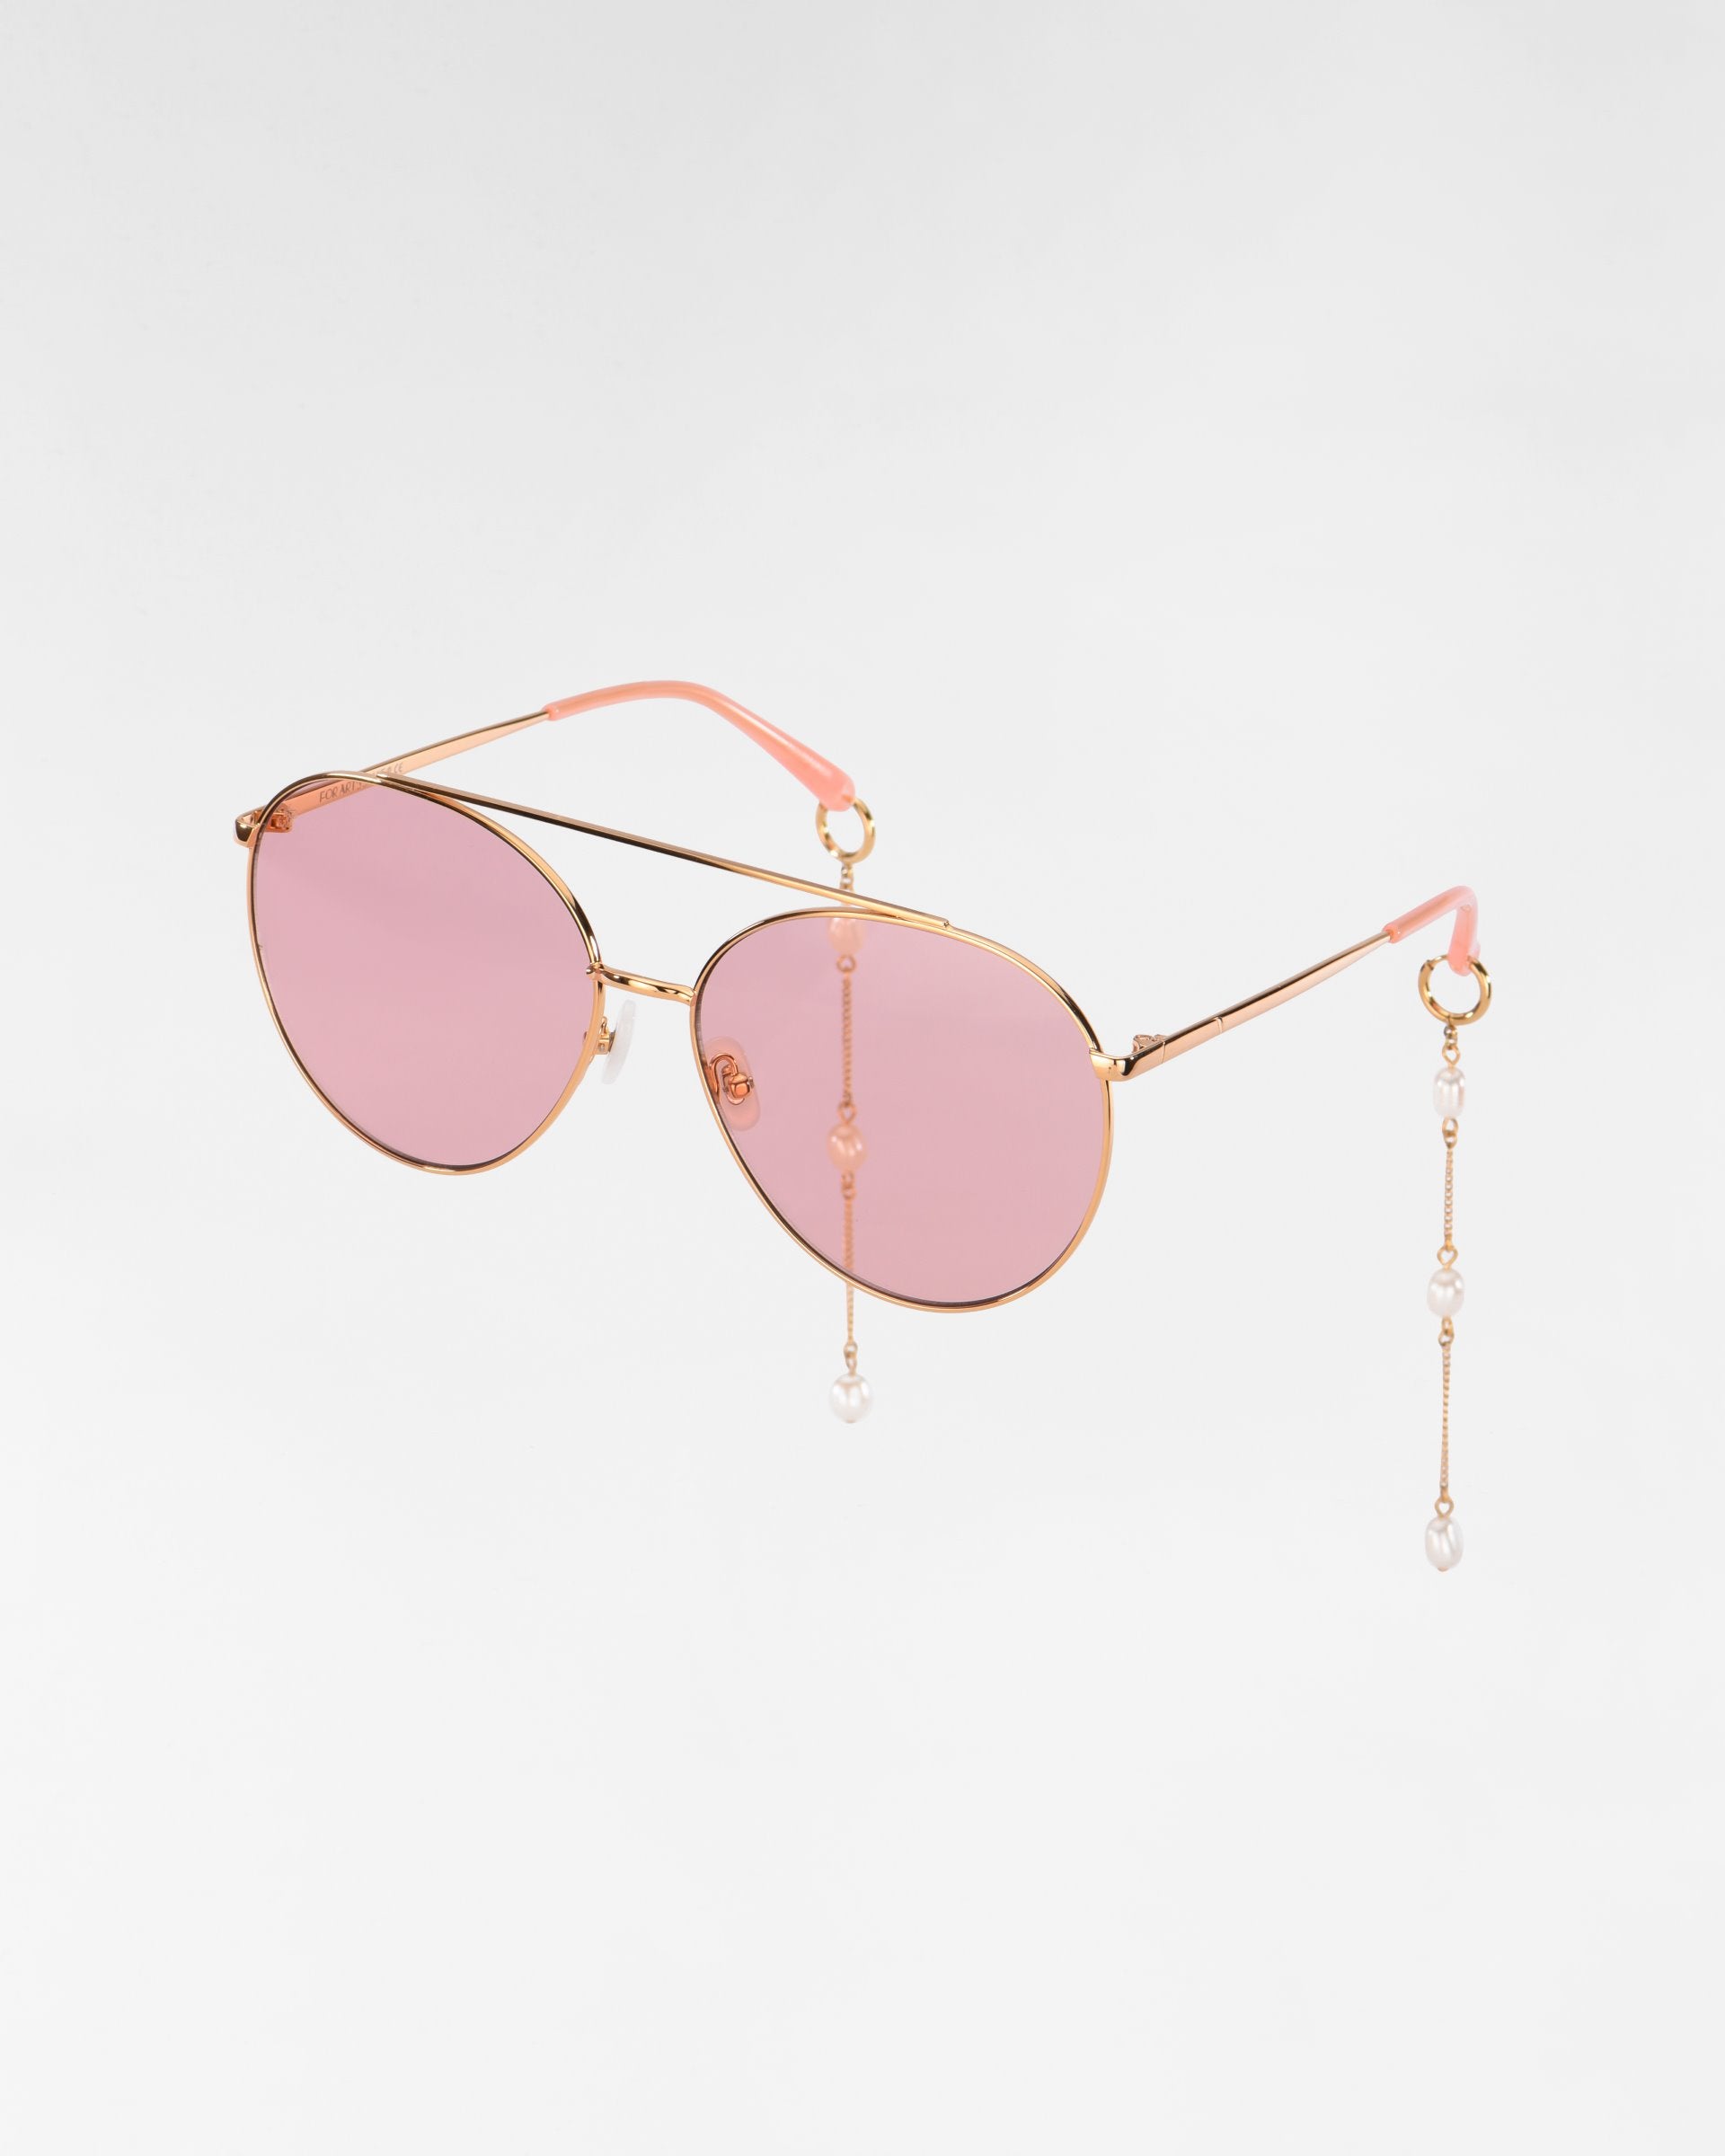 Yoyo by For Art's Sake®: Gold-framed aviator sunglasses with pink-tinted lenses, adorned with delicate freshwater pearl-chains hanging from the arms. The sunglasses have pink accents at the ends of the arms, adding a touch of elegance and style. Featuring 18k gold plating for an extra luxurious finish, against a plain white background.